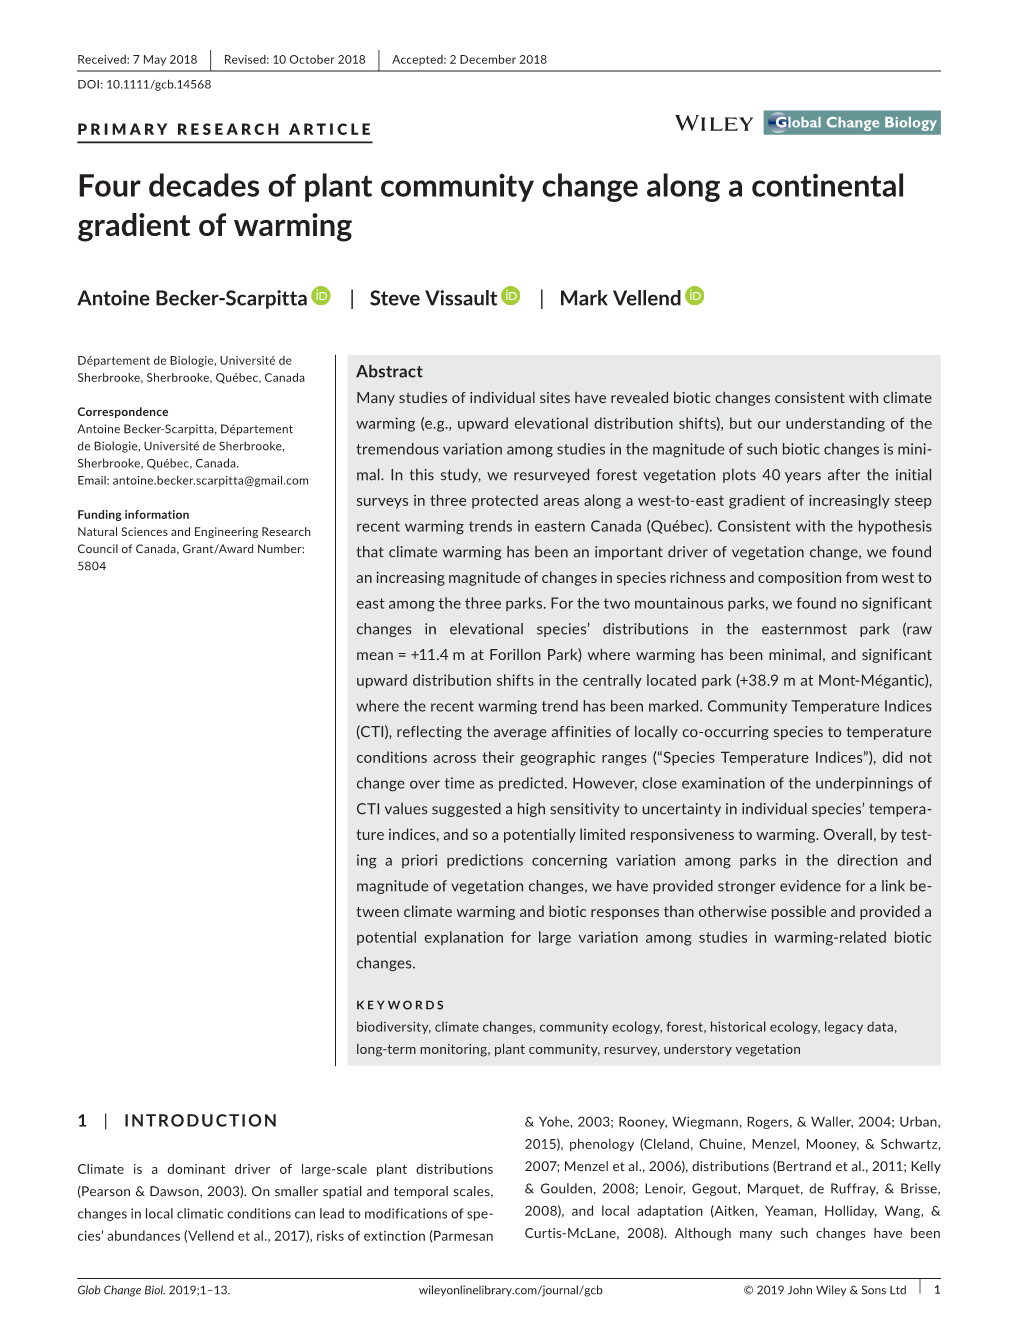 Four Decades of Plant Community Change Along a Continental Gradient of Warming